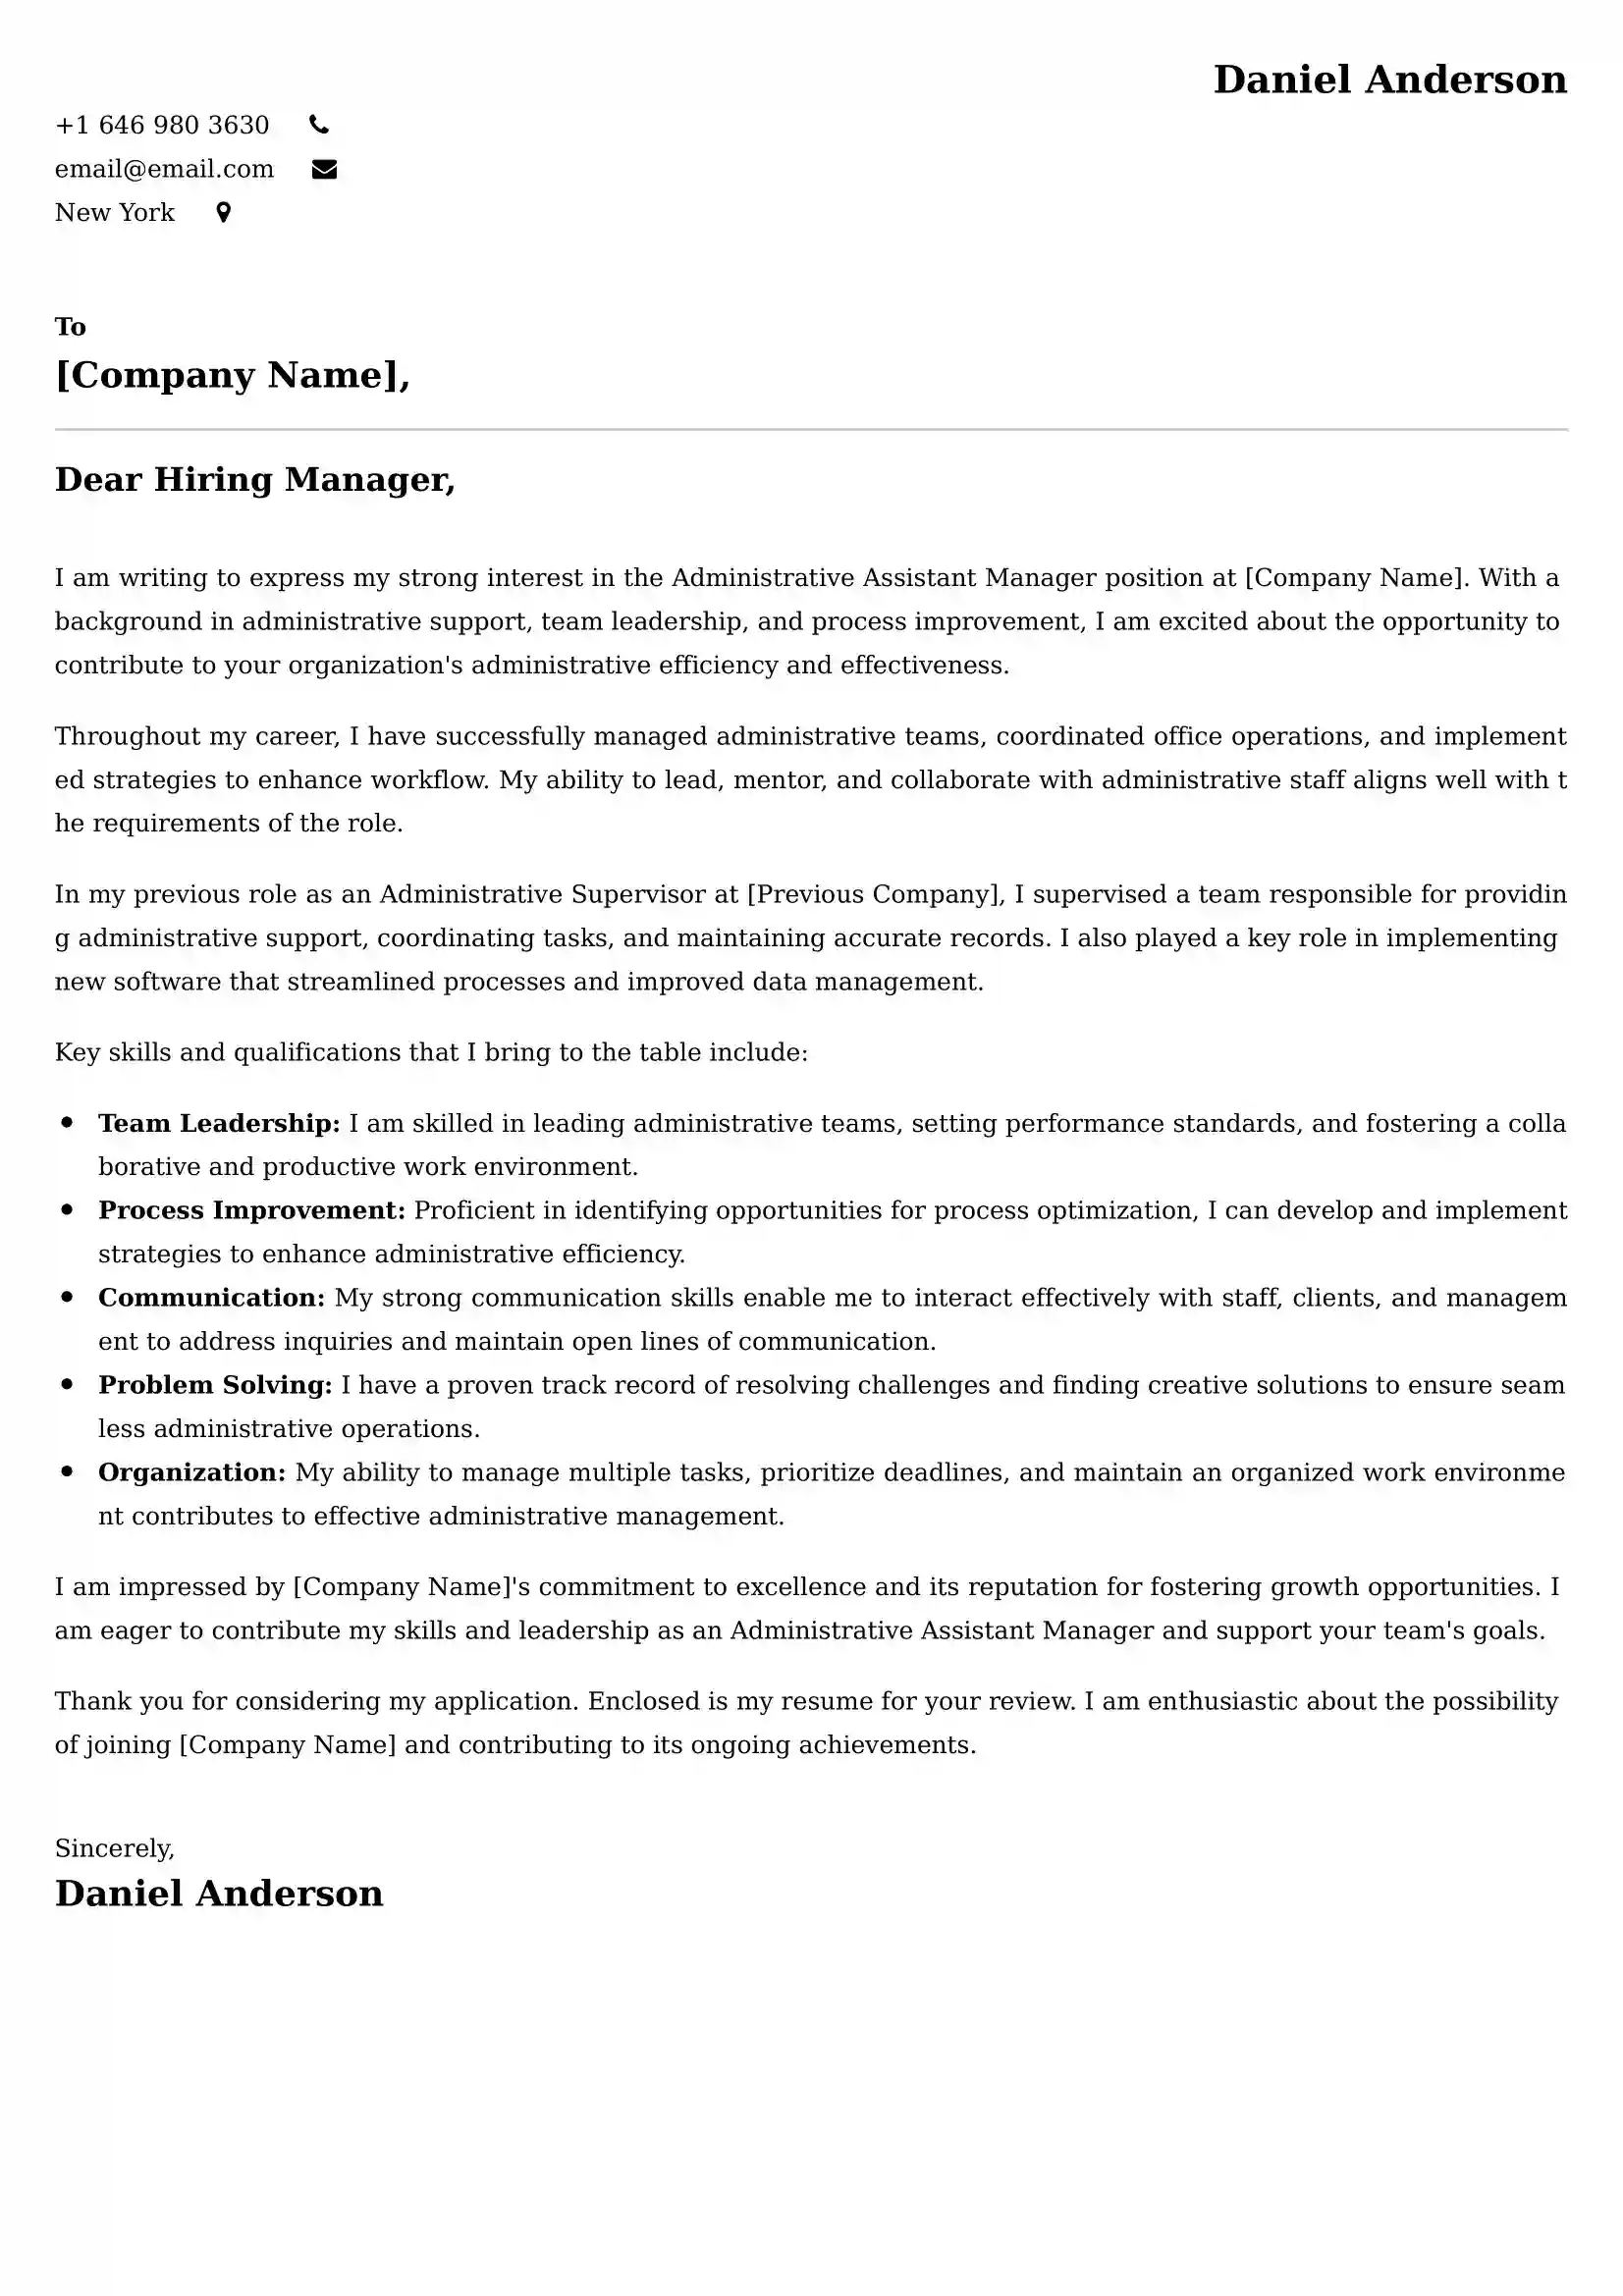 Administrative Assistant Manager Cover Letter Examples for UK 